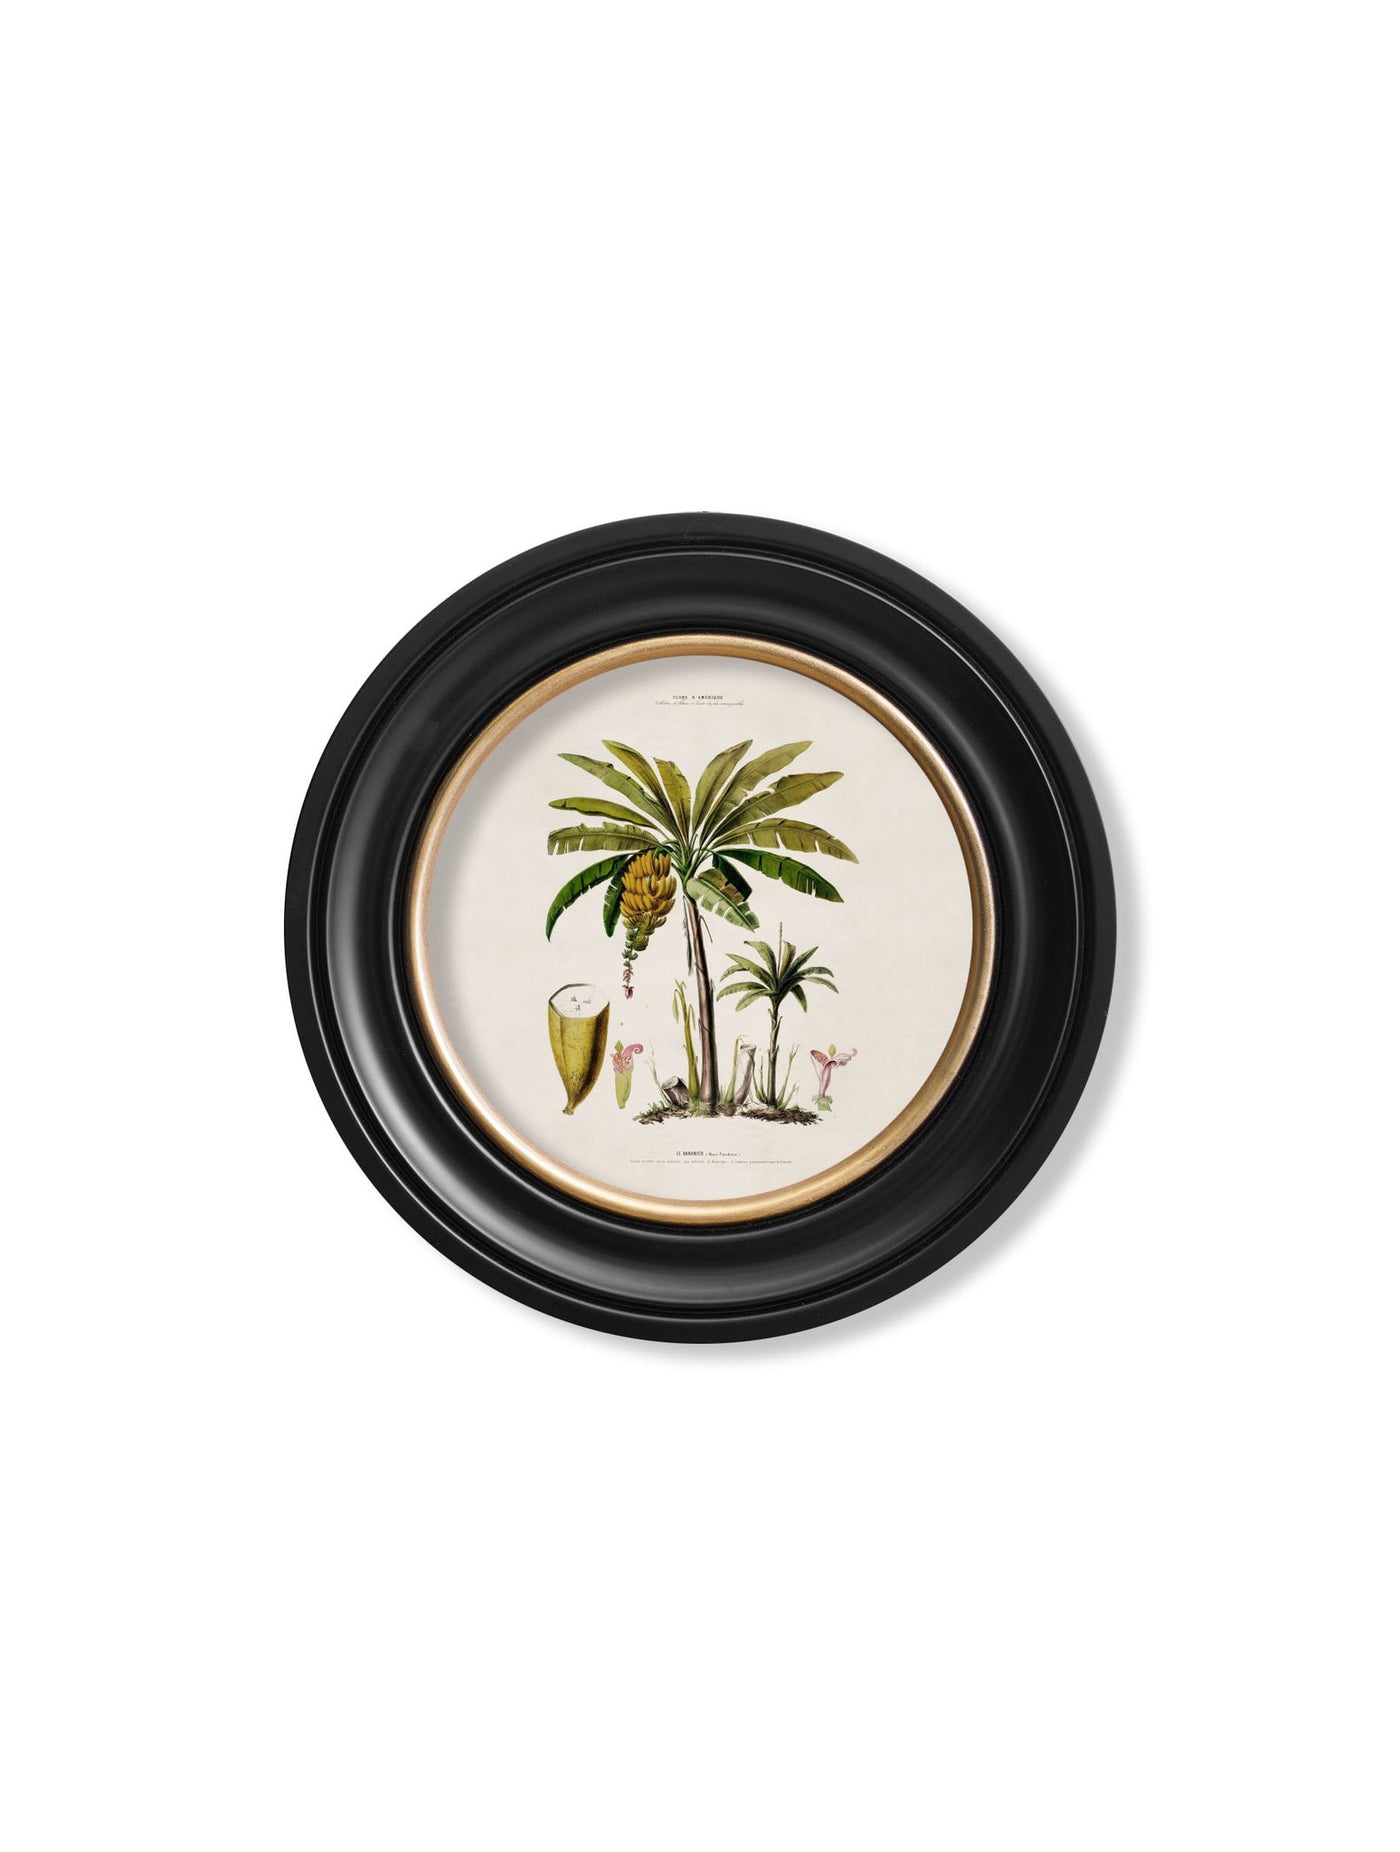 C.1843 MACAW PALM - ROUND FRAME - TheArtistsQuarter